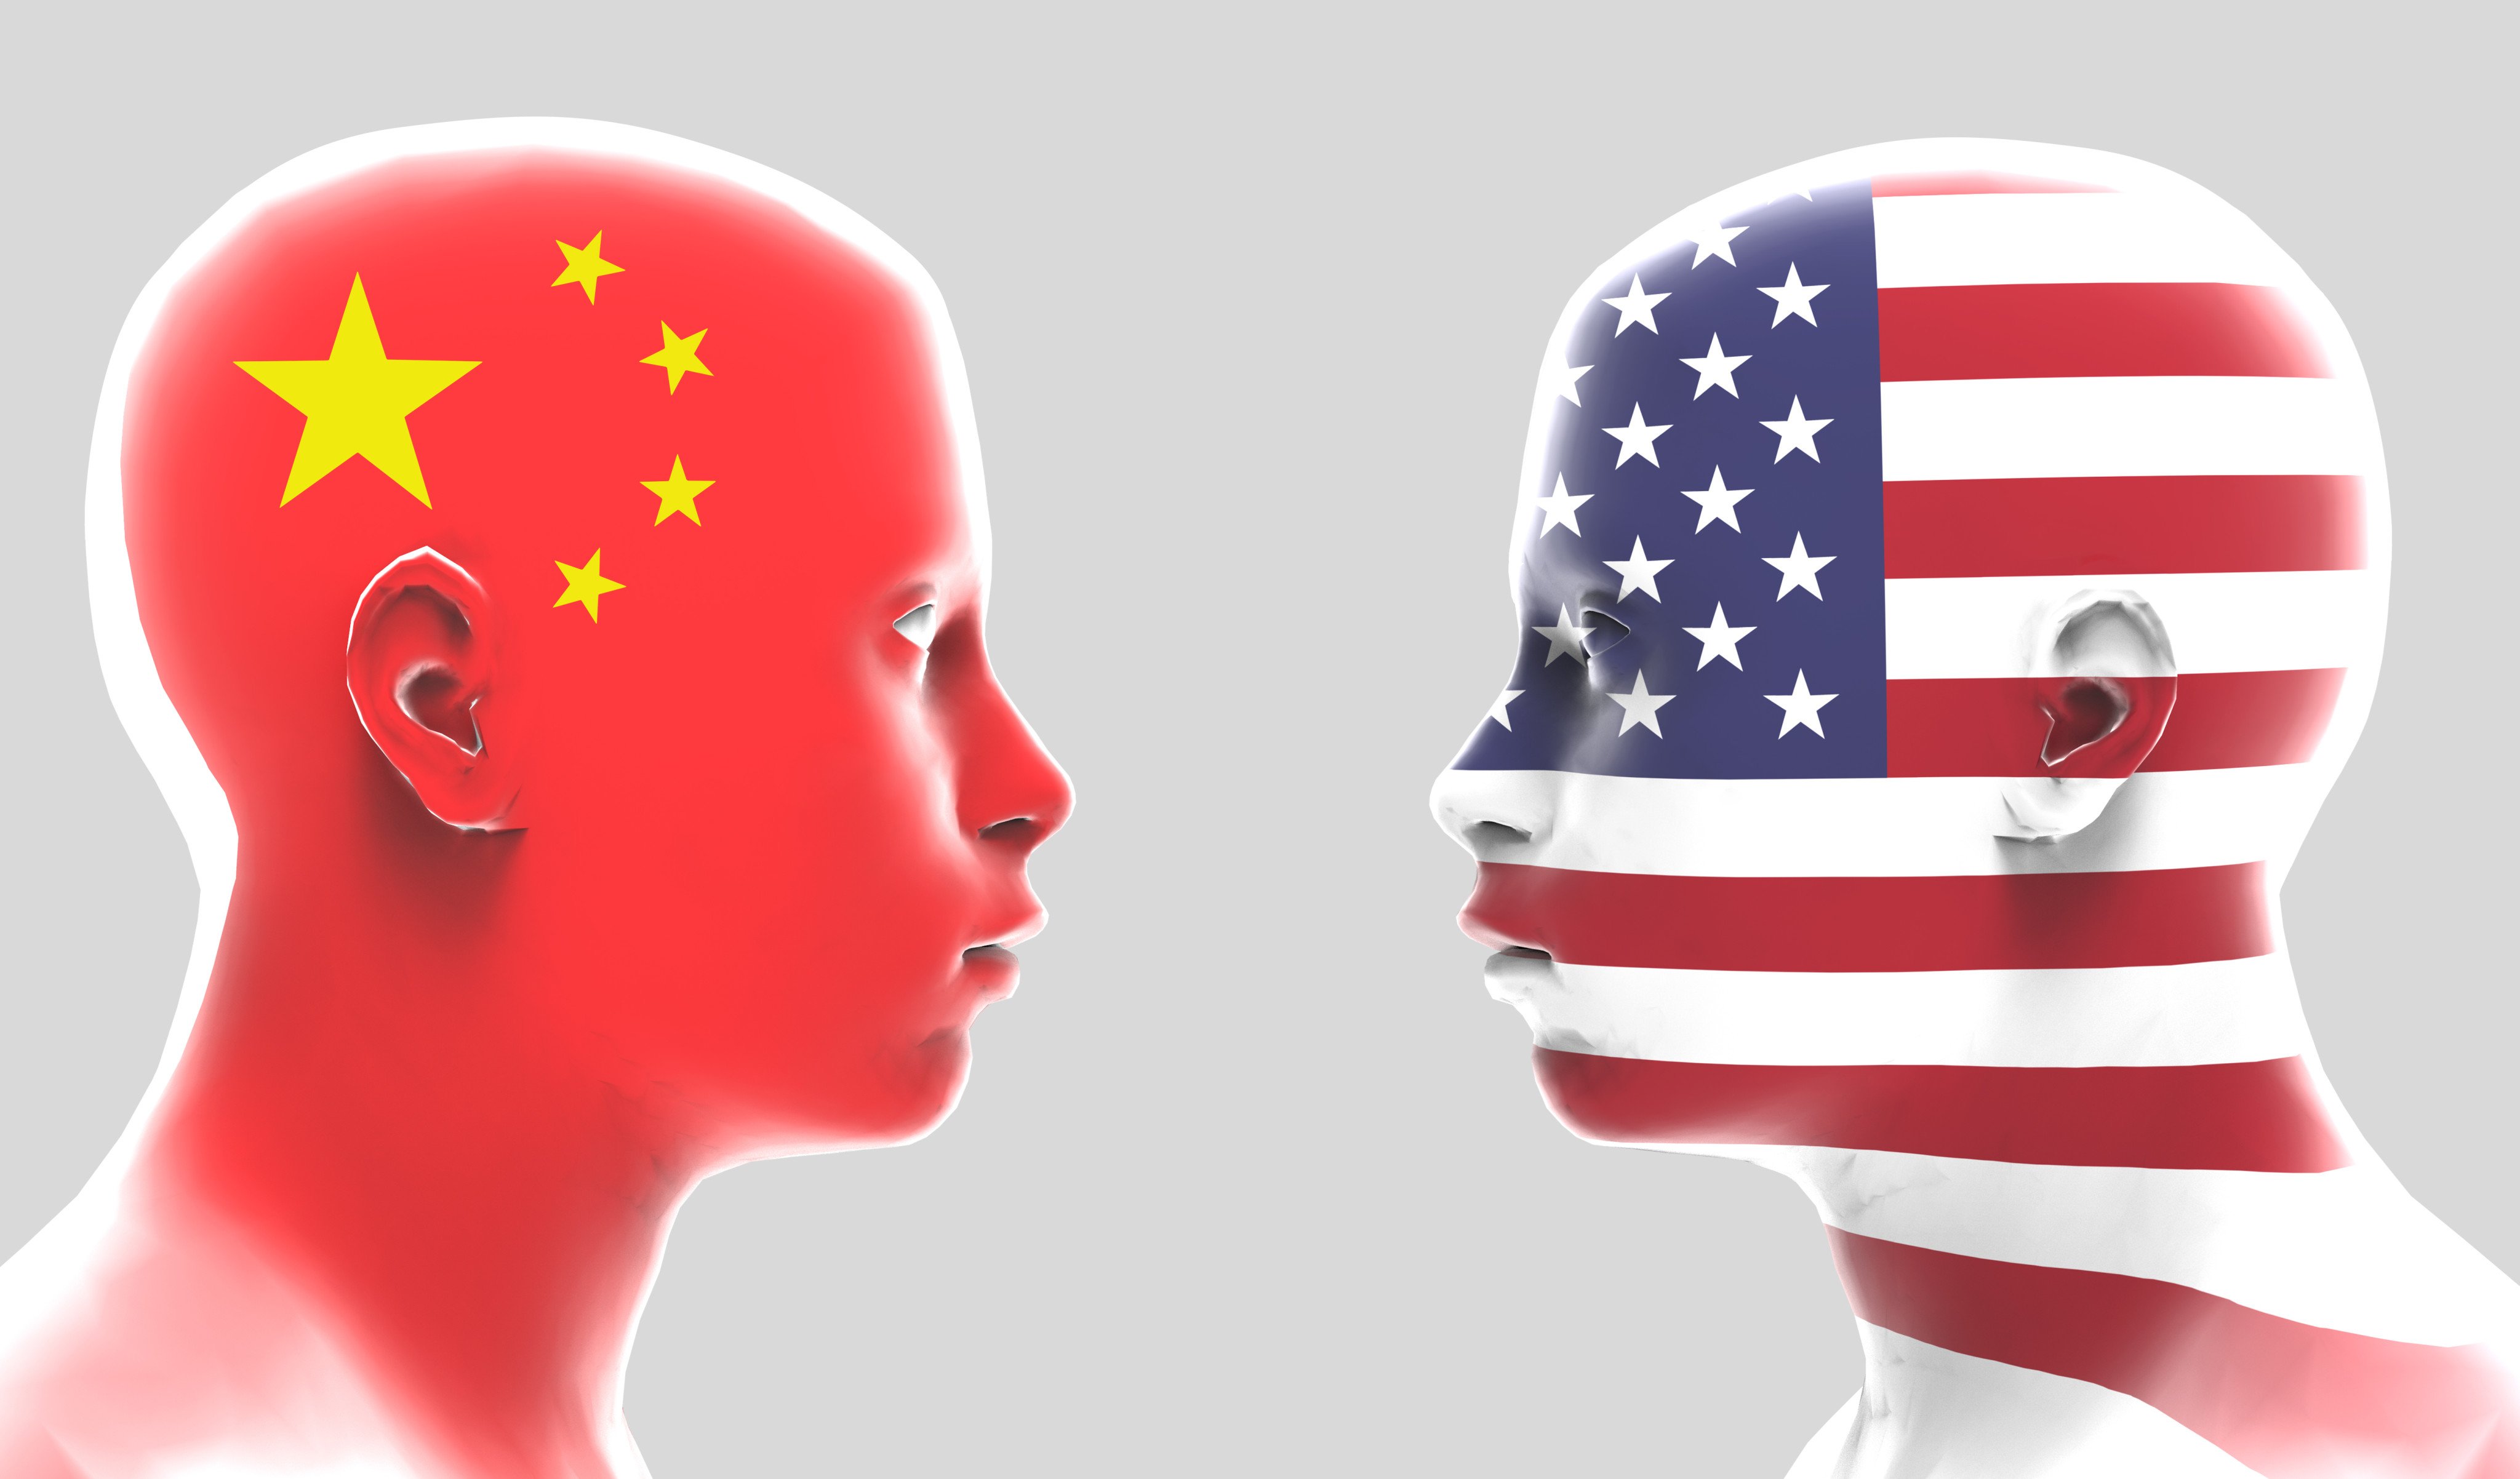 Major hurdles faced by China’s artificial-intelligence efforts reflect a widening gap with the US in terms of innovation in that critical technology. Image: Shutterstock